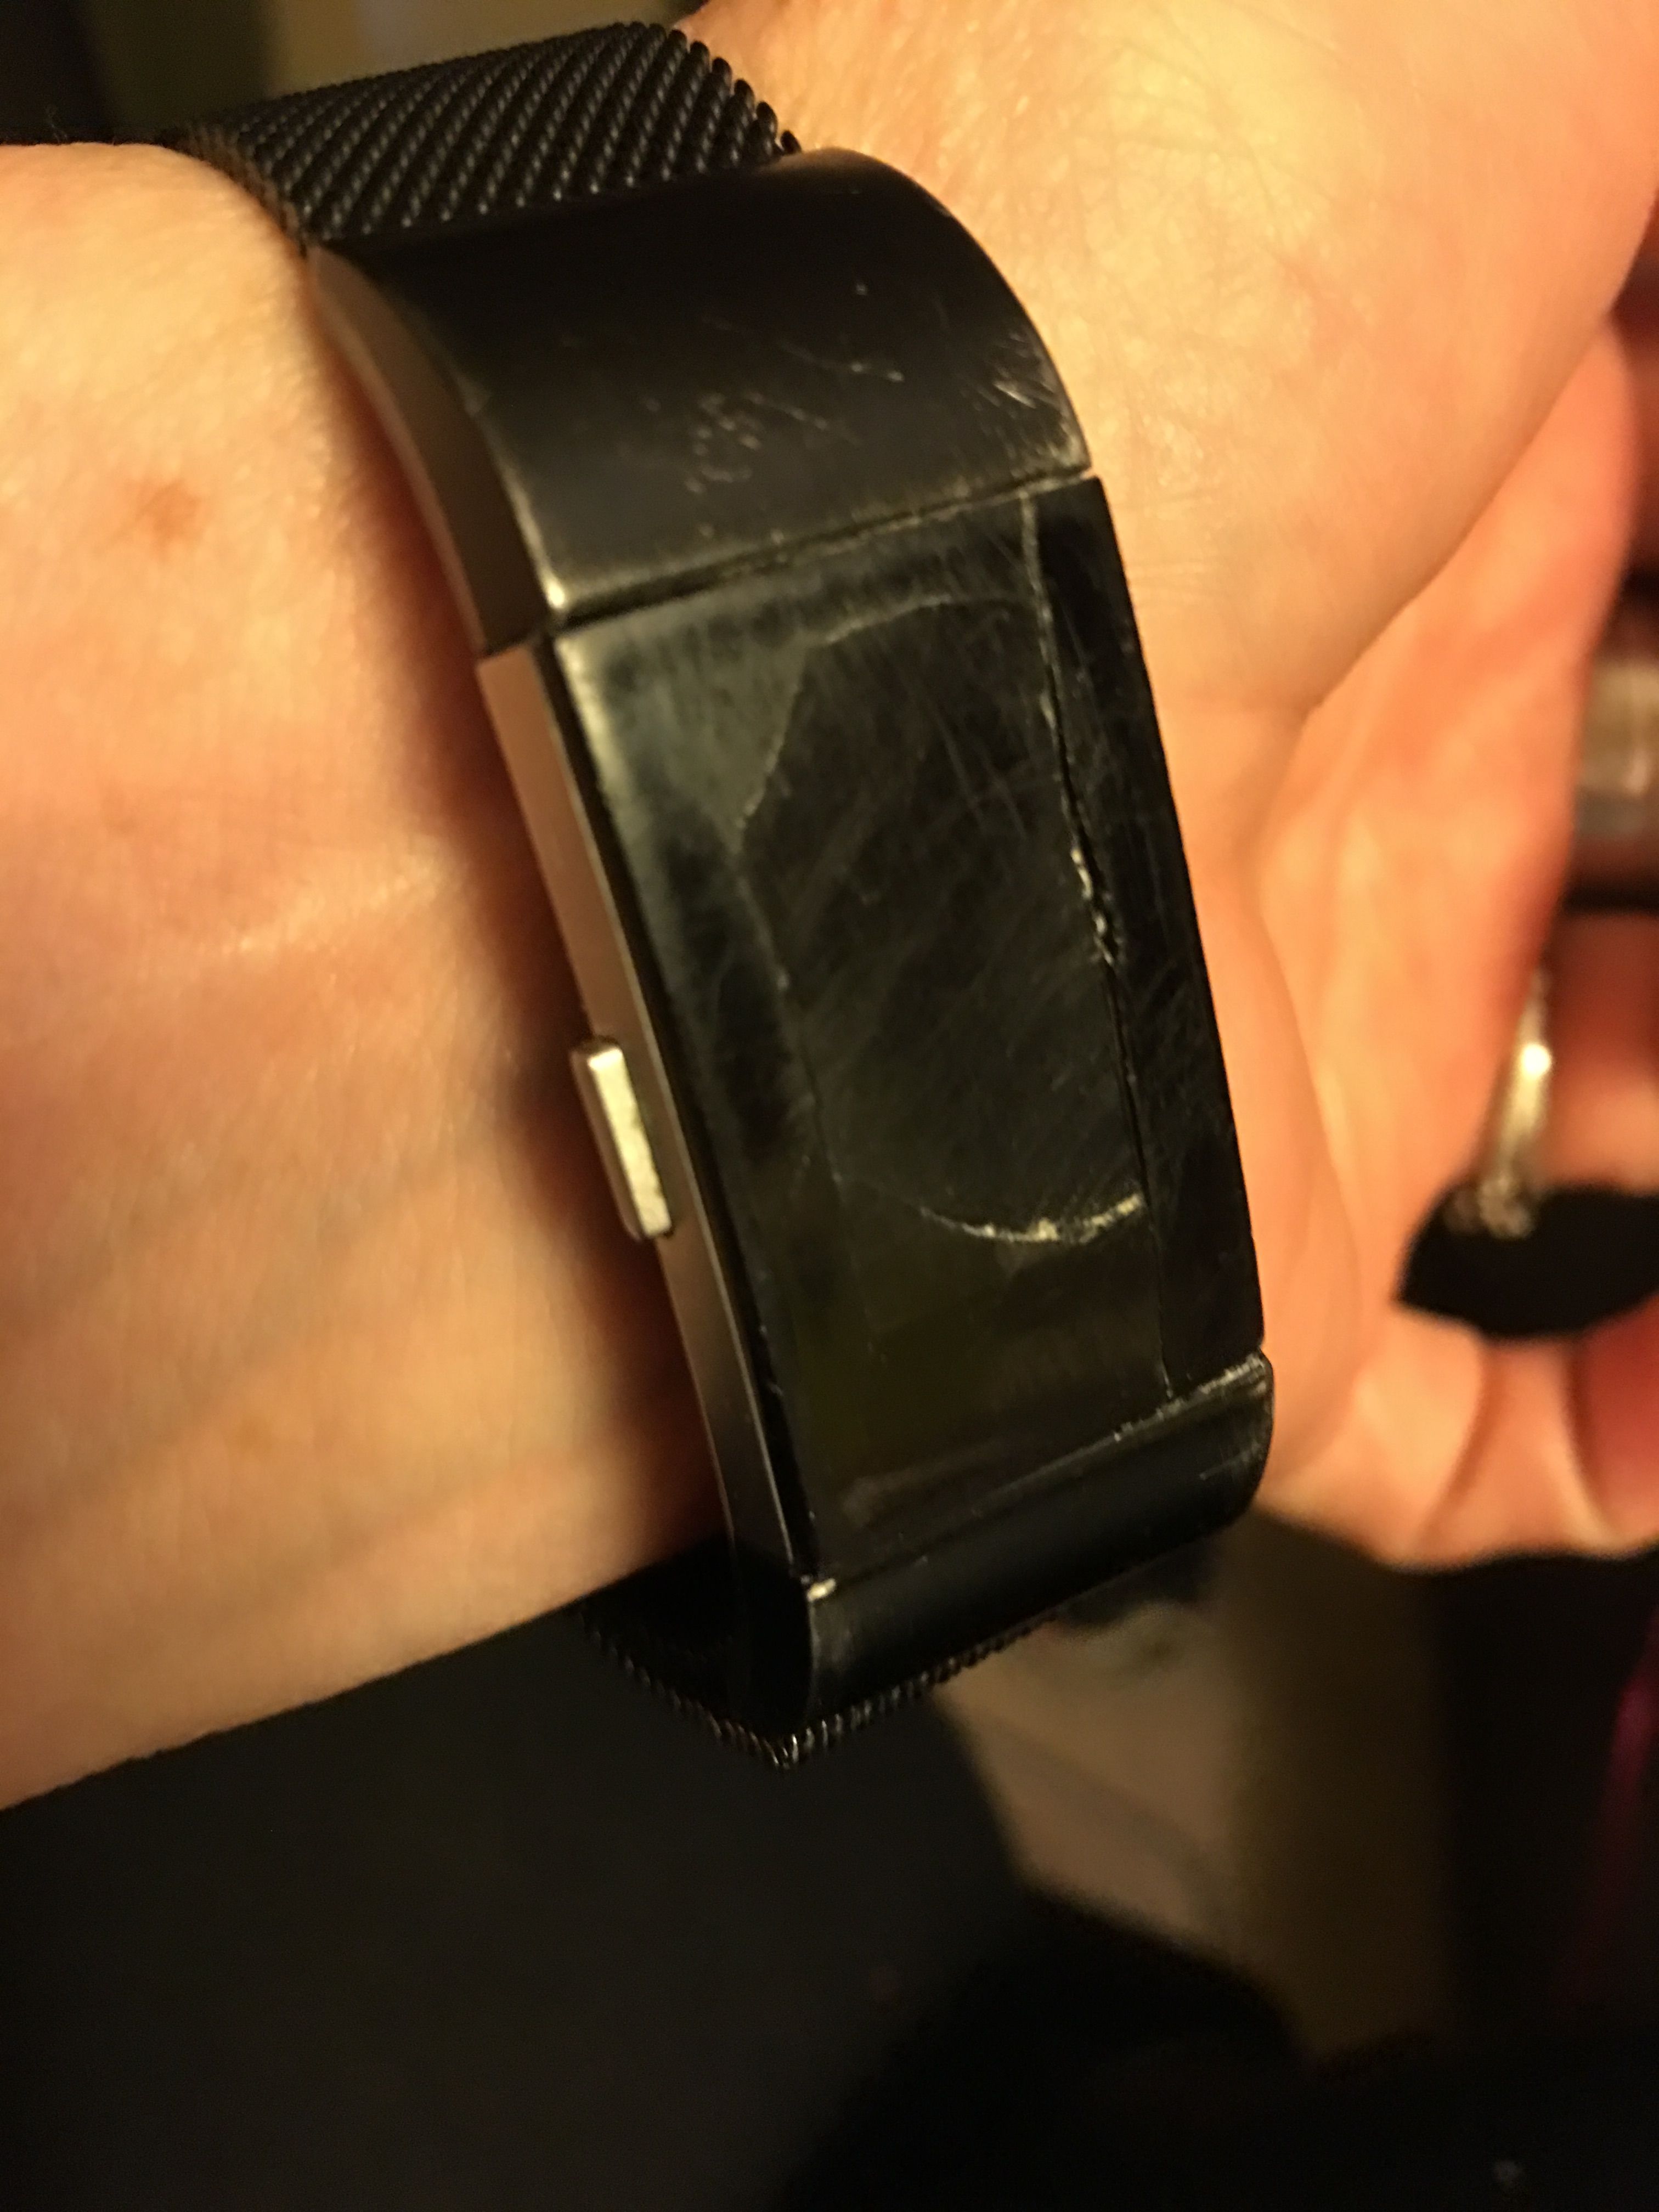 Credential mavepine fire gange Solved: Can a Cracked screen be replaced - Fitbit Community